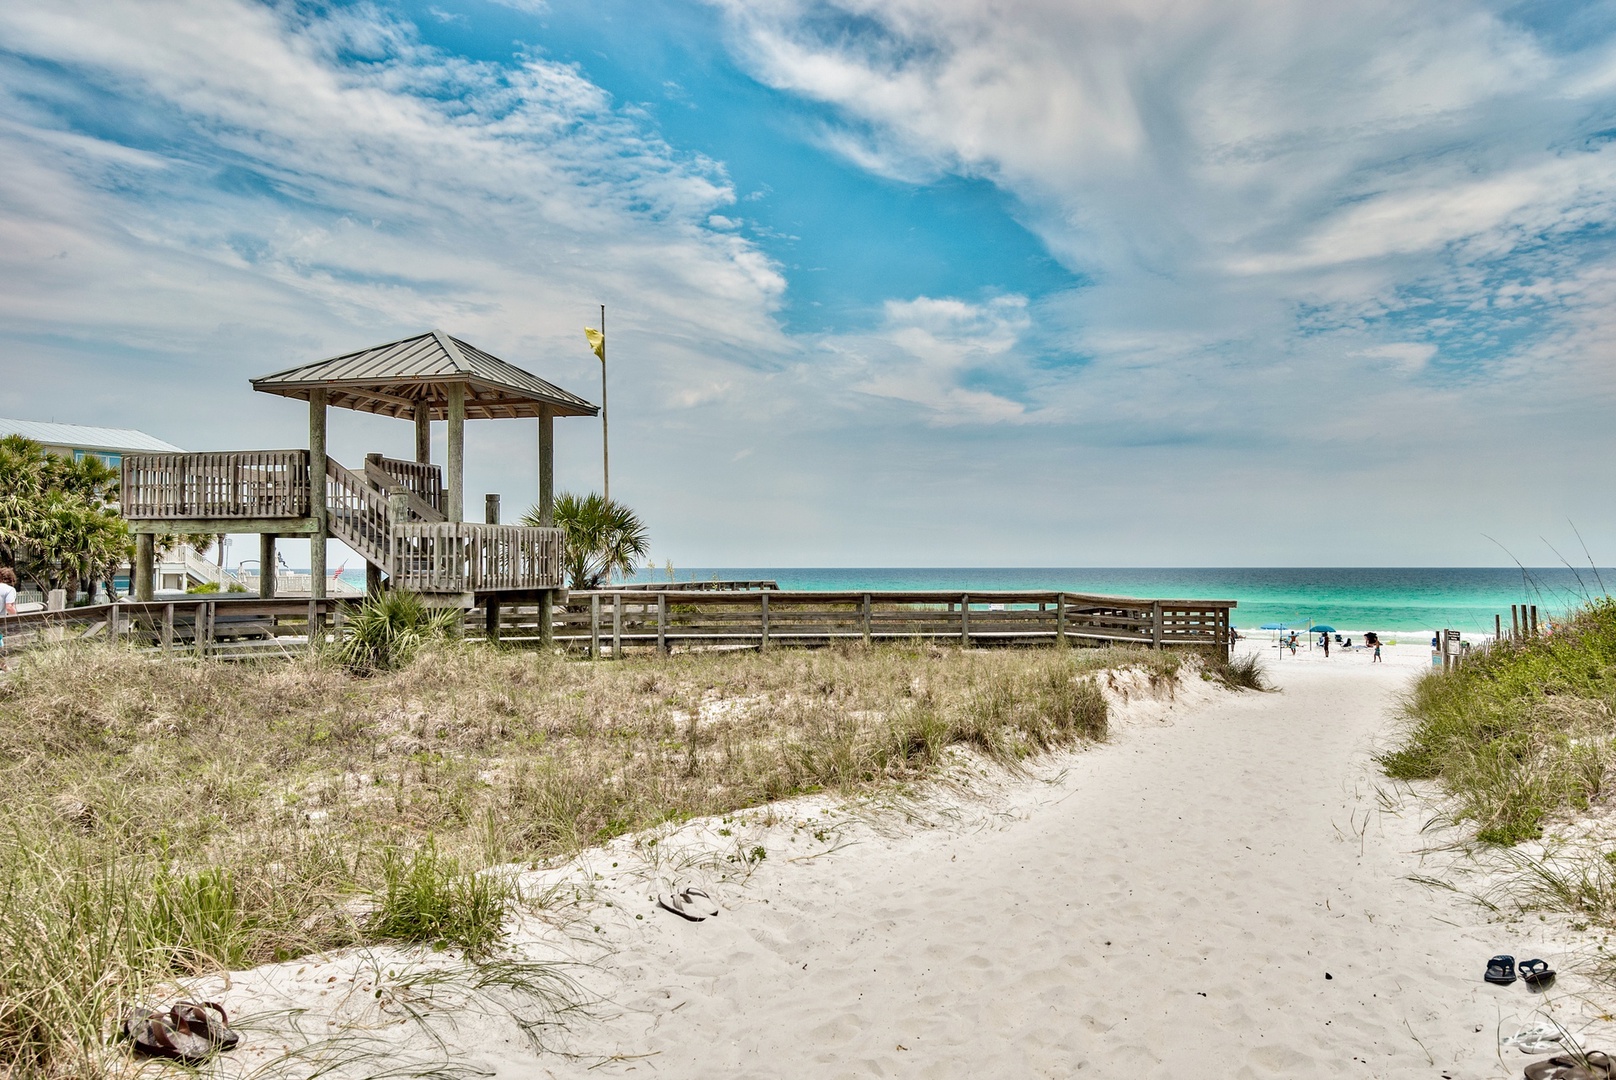 The beautiful white-sand beaches of the Gulf of Mexico!